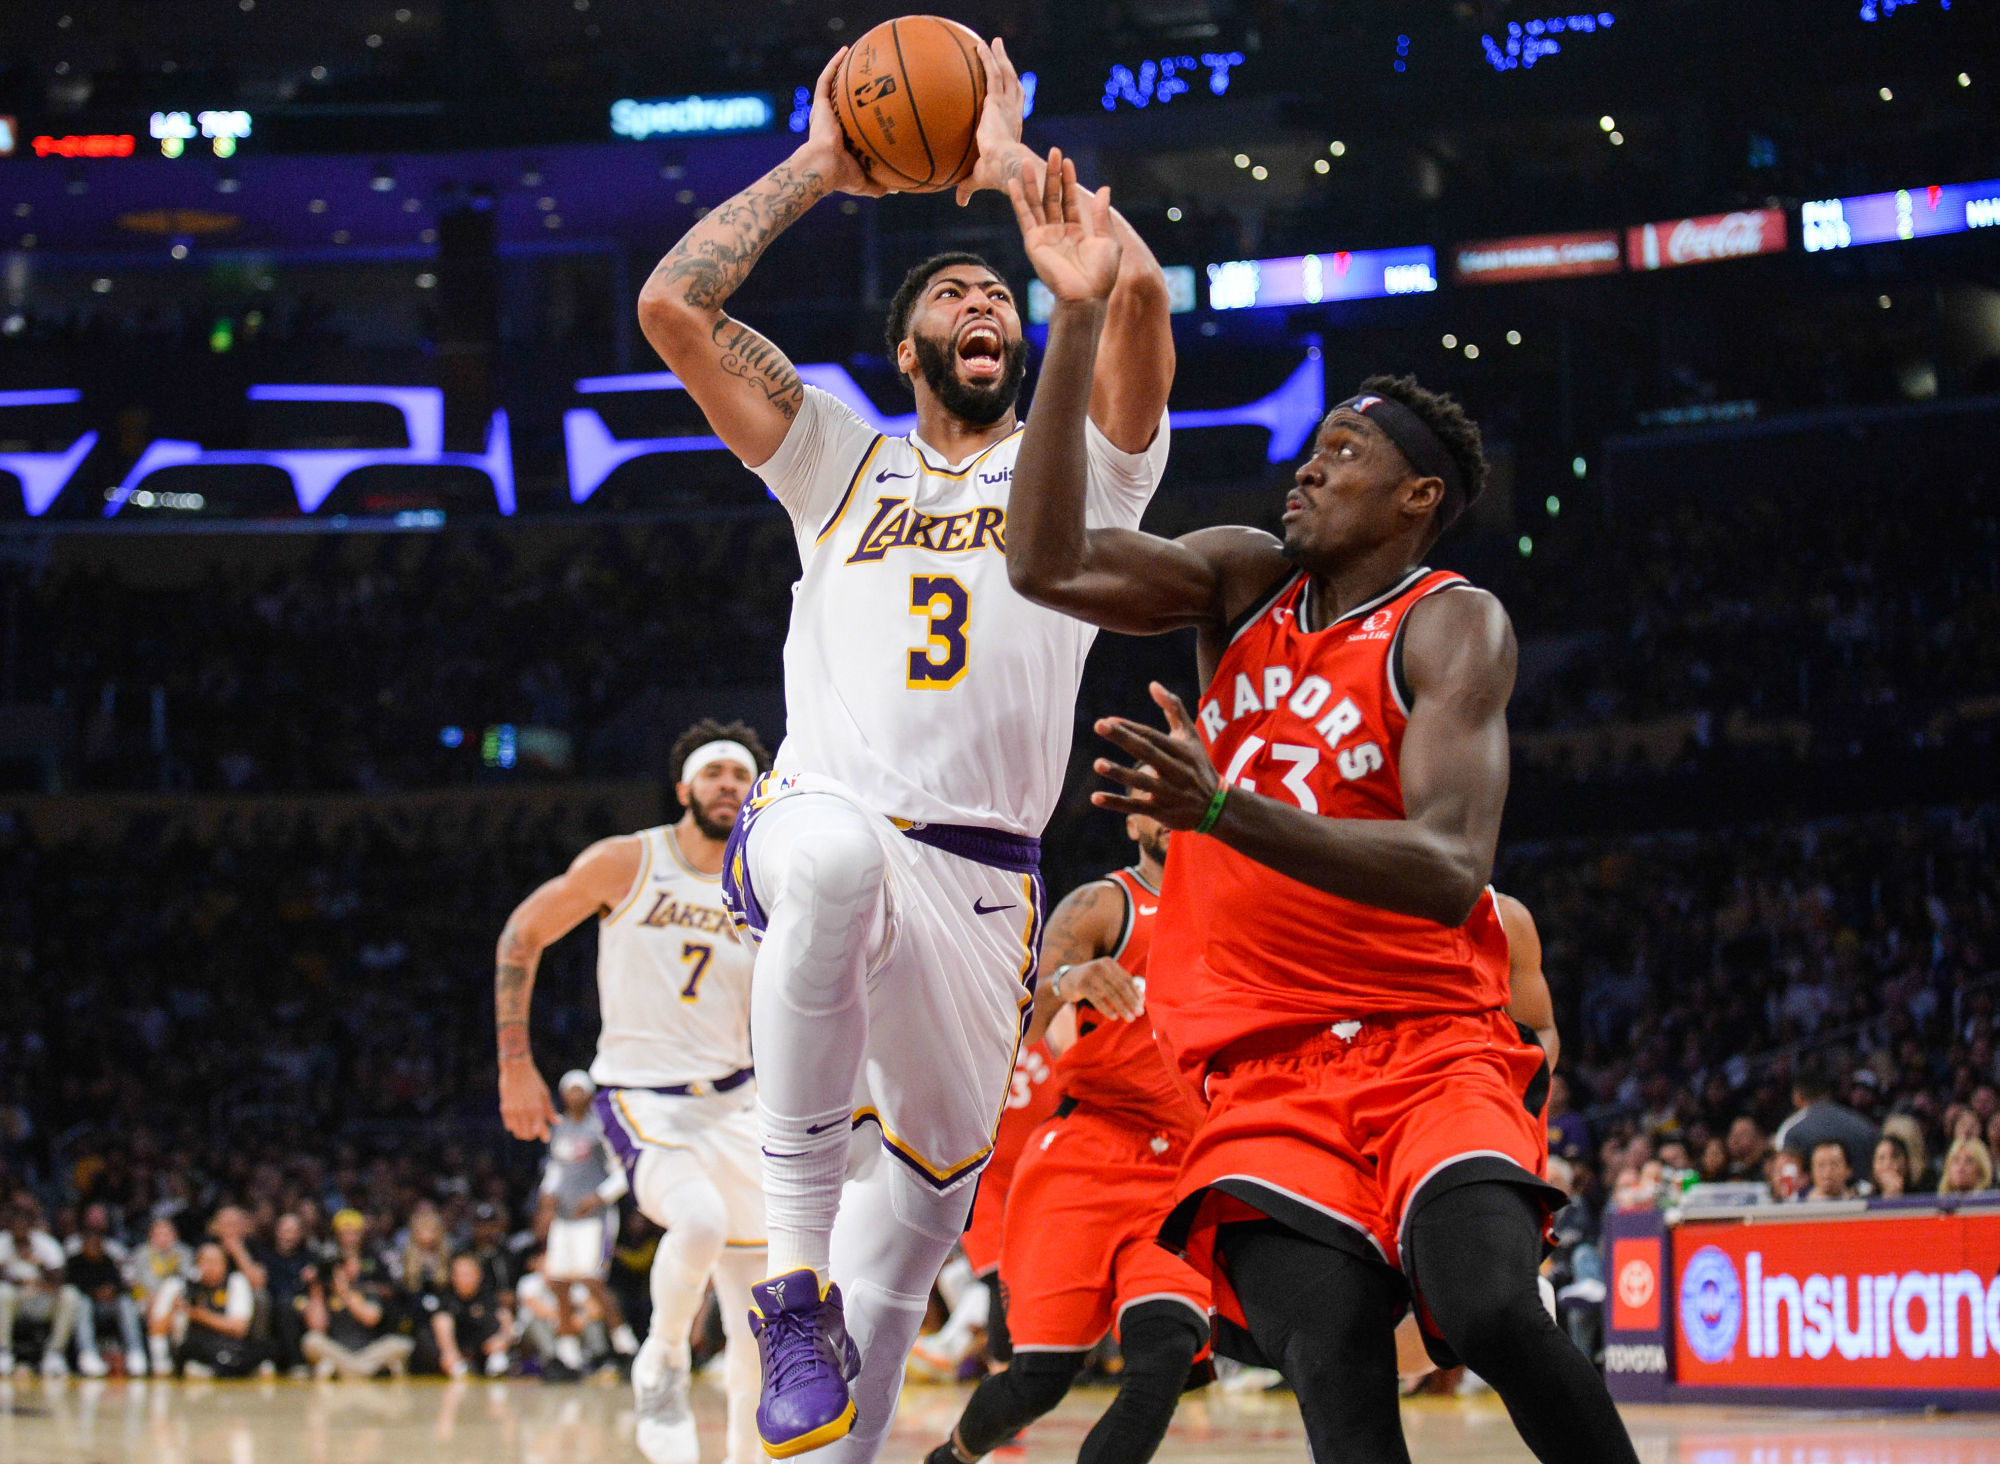 November 10, 2019; Los Angeles, CA, USA; Los Angeles Lakers forward Anthony Davis (3) moves to the basket against Toronto Raptors forward Pascal Siakam (43) during the second half at Staples Center. Mandatory Credit: Gary A. Vasquez-USA TODAY Sports/Sipa USA 

Photo by Icon Sport - Anthony DAVIS - Pascal SIAKAM - Staples Center - Los Angeles (Etats Unis)